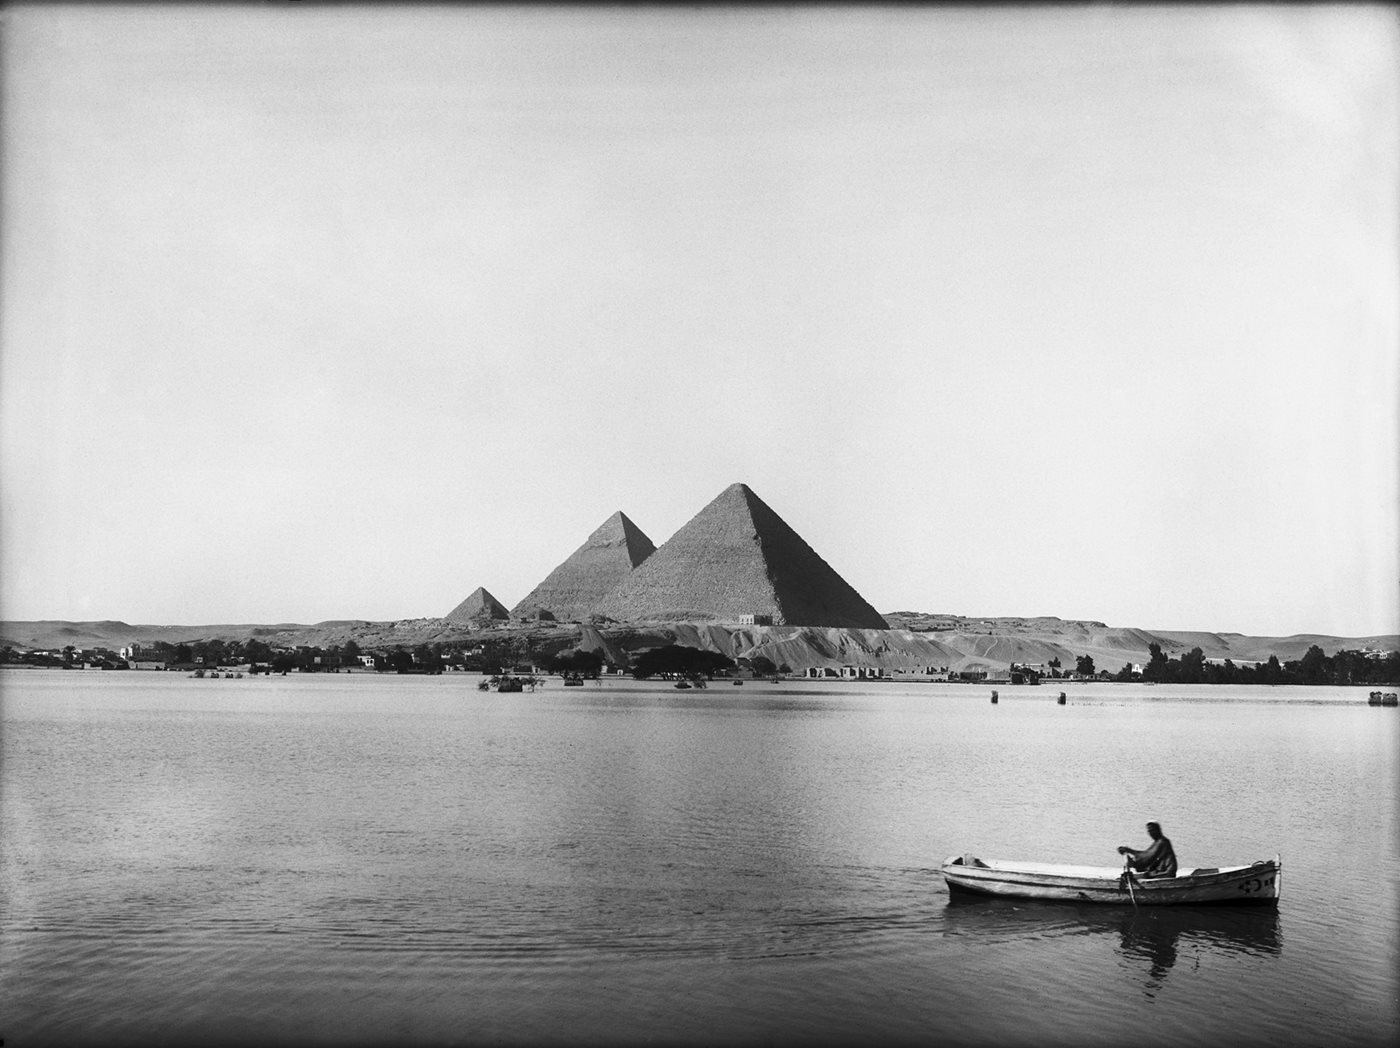 In October 1927 Ibrahim photographed this boatman crossing inundated fields just east of the Giza Pyramid Complex during the annual Nile flood, an event that ended in the 1960s with the completion of the Aswan High Dam.